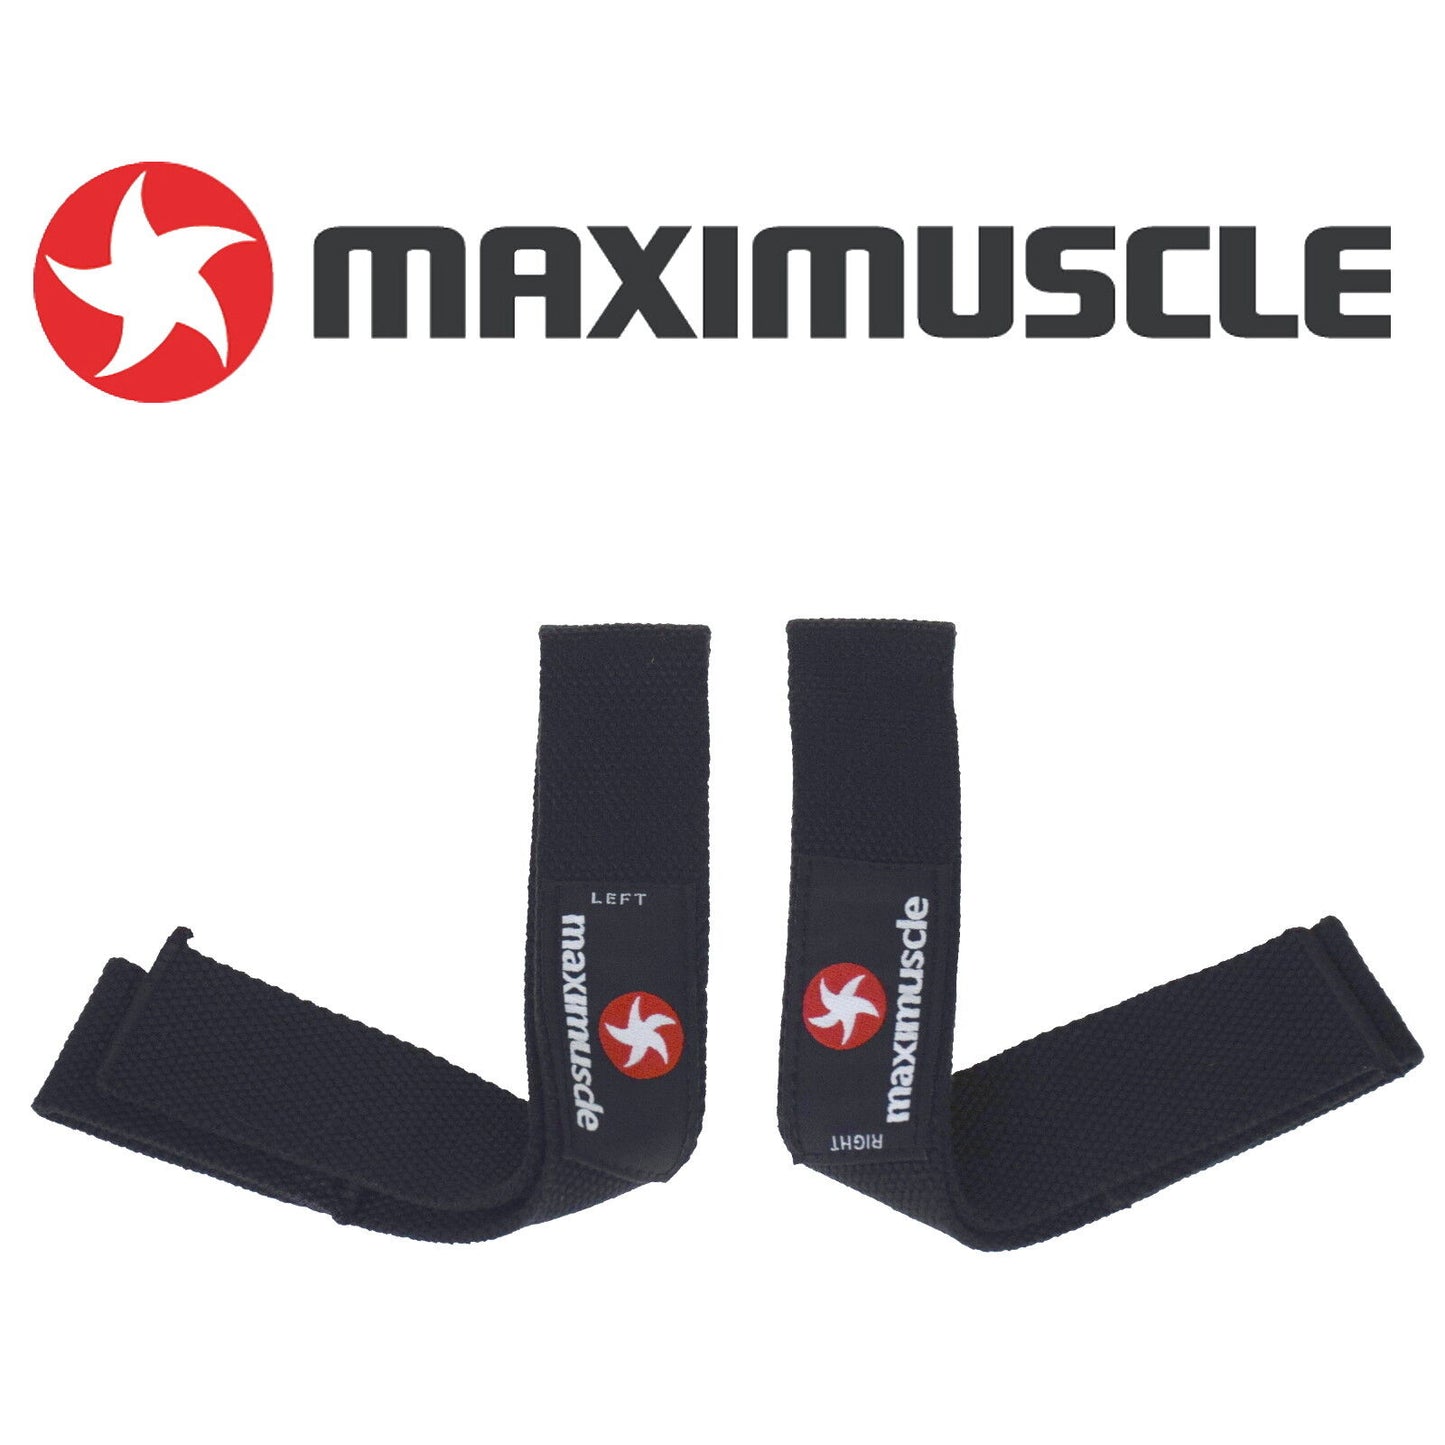 MAXI MUSCLE GYM TRAINING WEIGHTLIFTING WRIST STRAPS RIGHT & LEFT WITH CASE